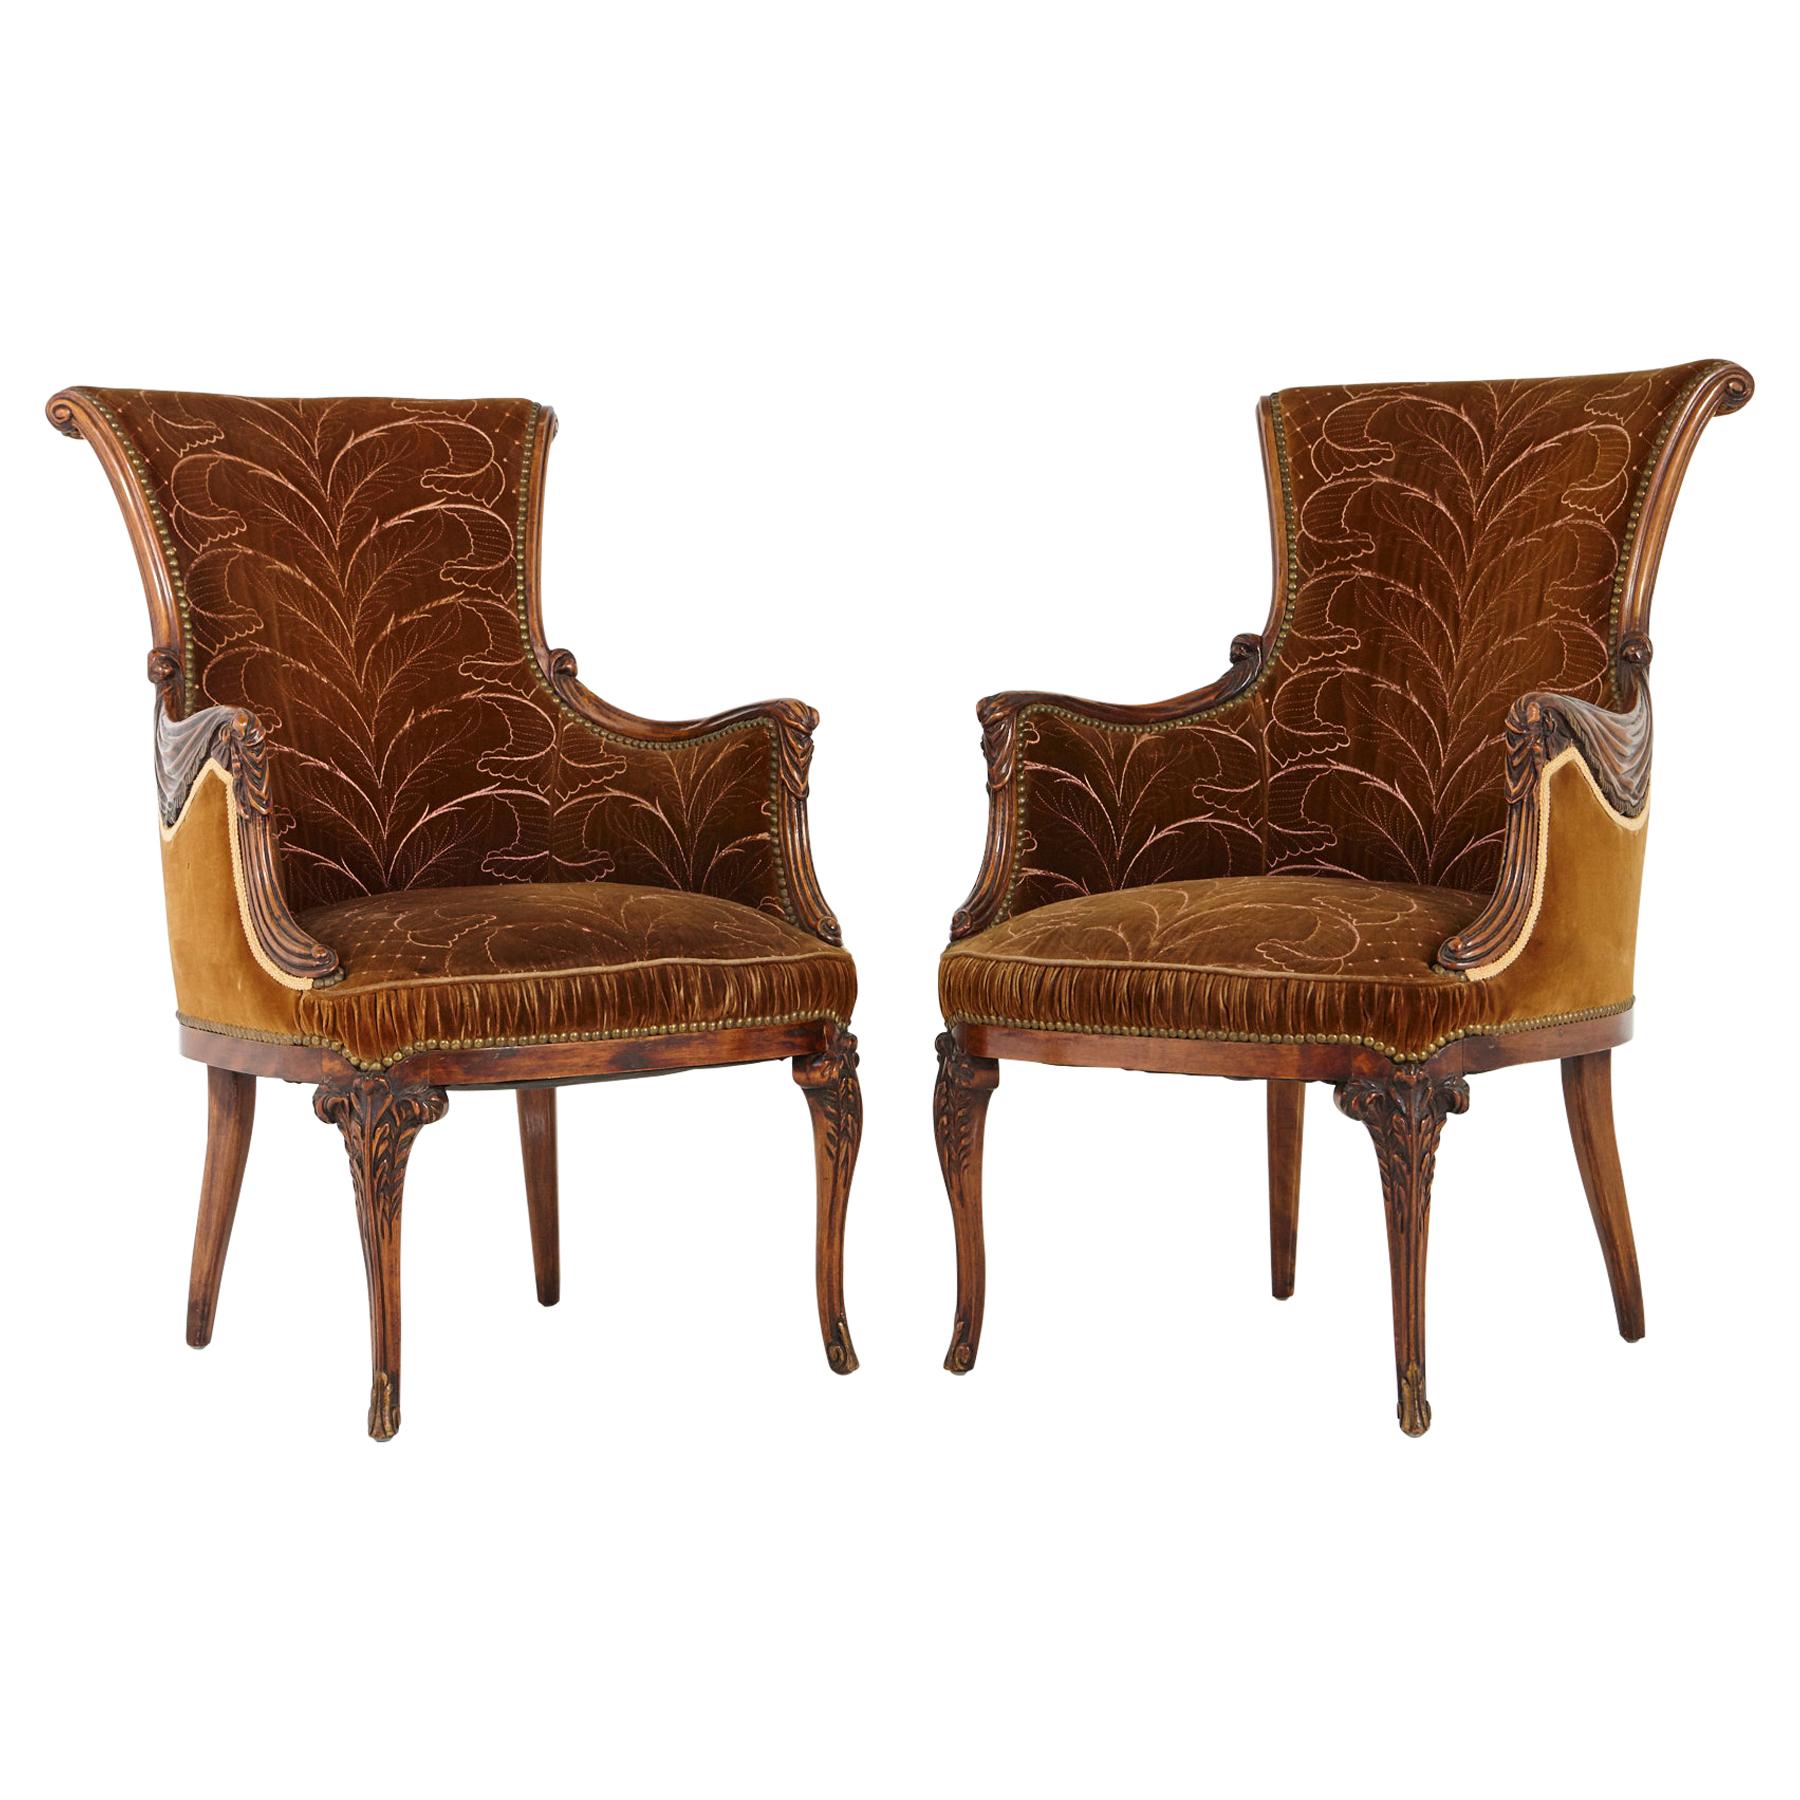 Pair of French Art Nouveau Armchairs, Two-Tone Cognac Colored Embroidered Velvet